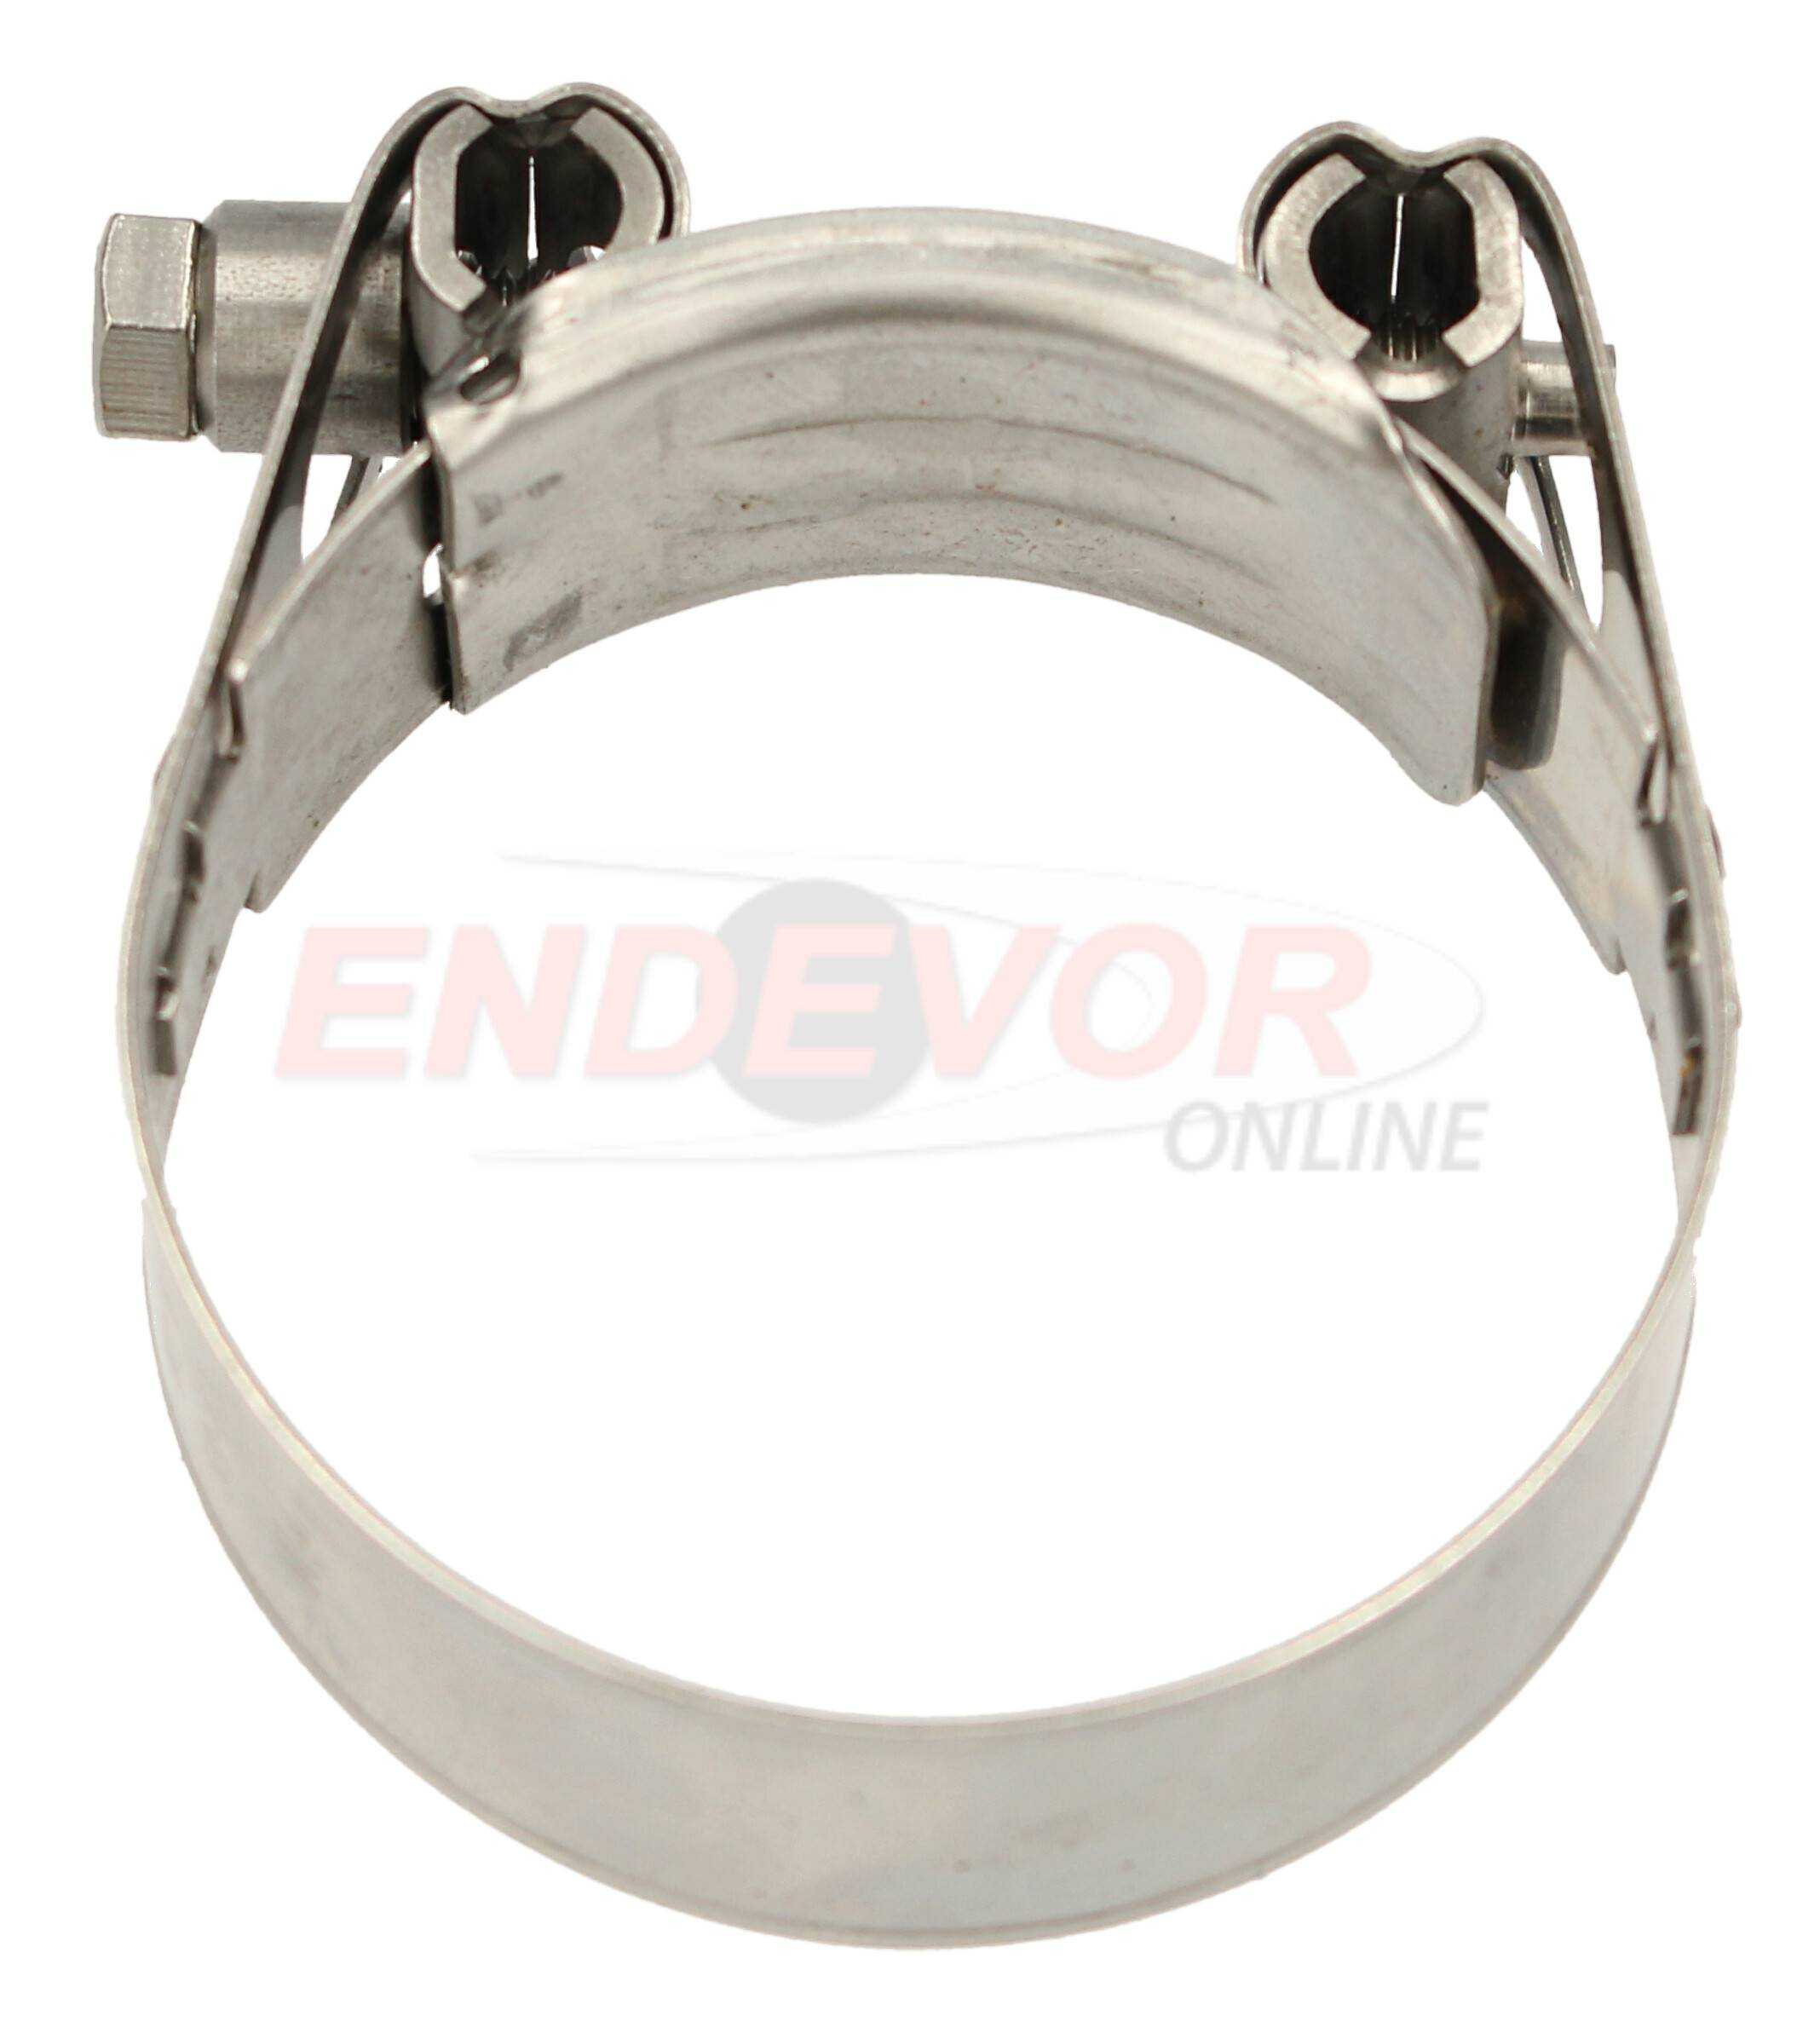 STAINLESS CLAMP DIN 3017 W4 NORMA - Image 2